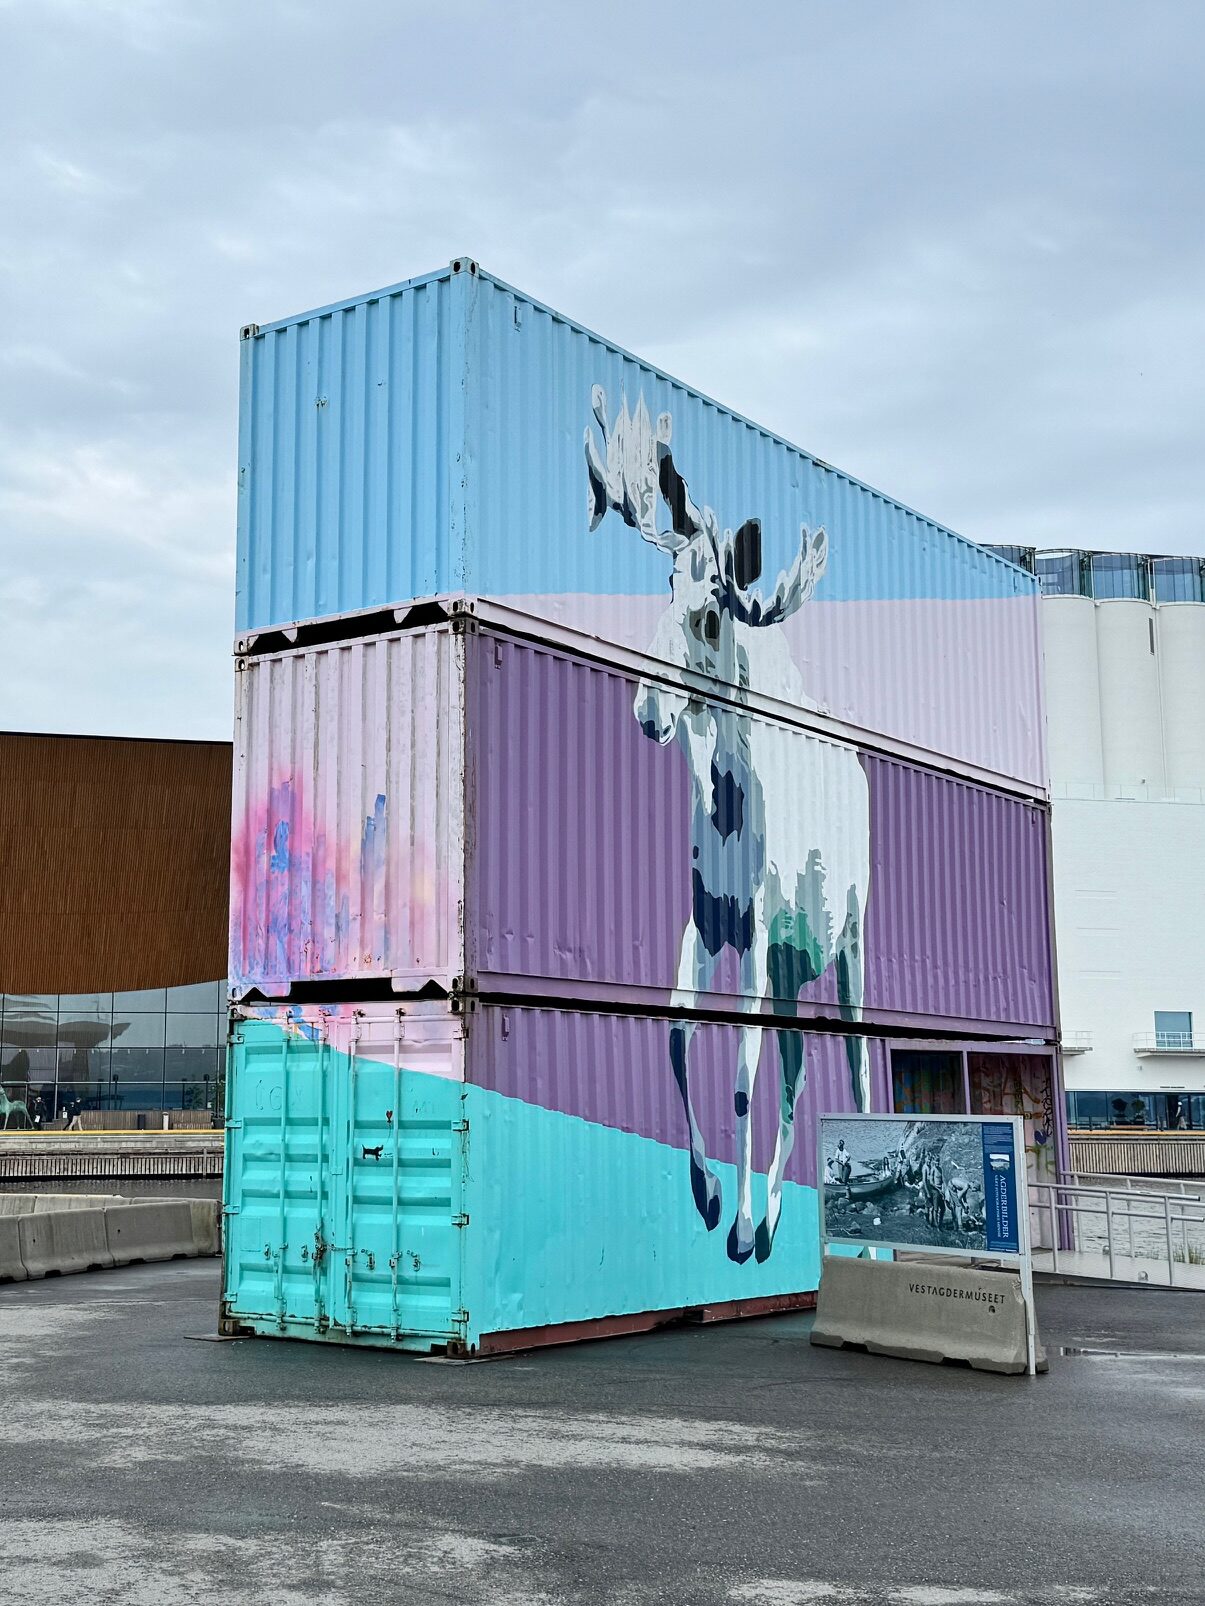 A colorful mural painted on shipping containers greets visitors at the Kristiansand, Norway cruise port.